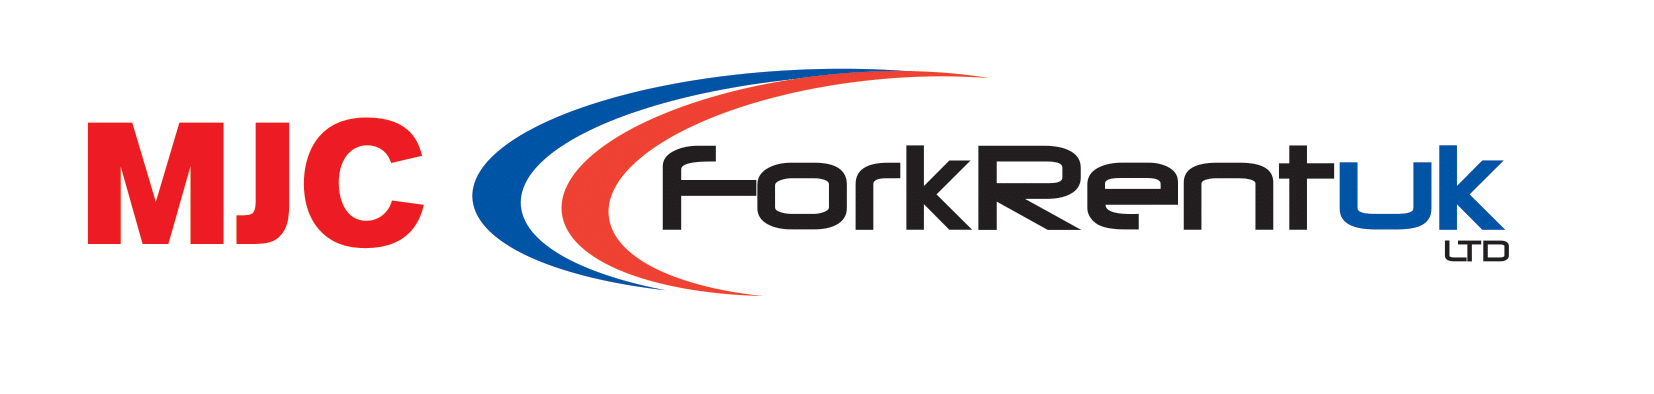 MJC Fork Rent UK Logo - Click Here for the Homepage